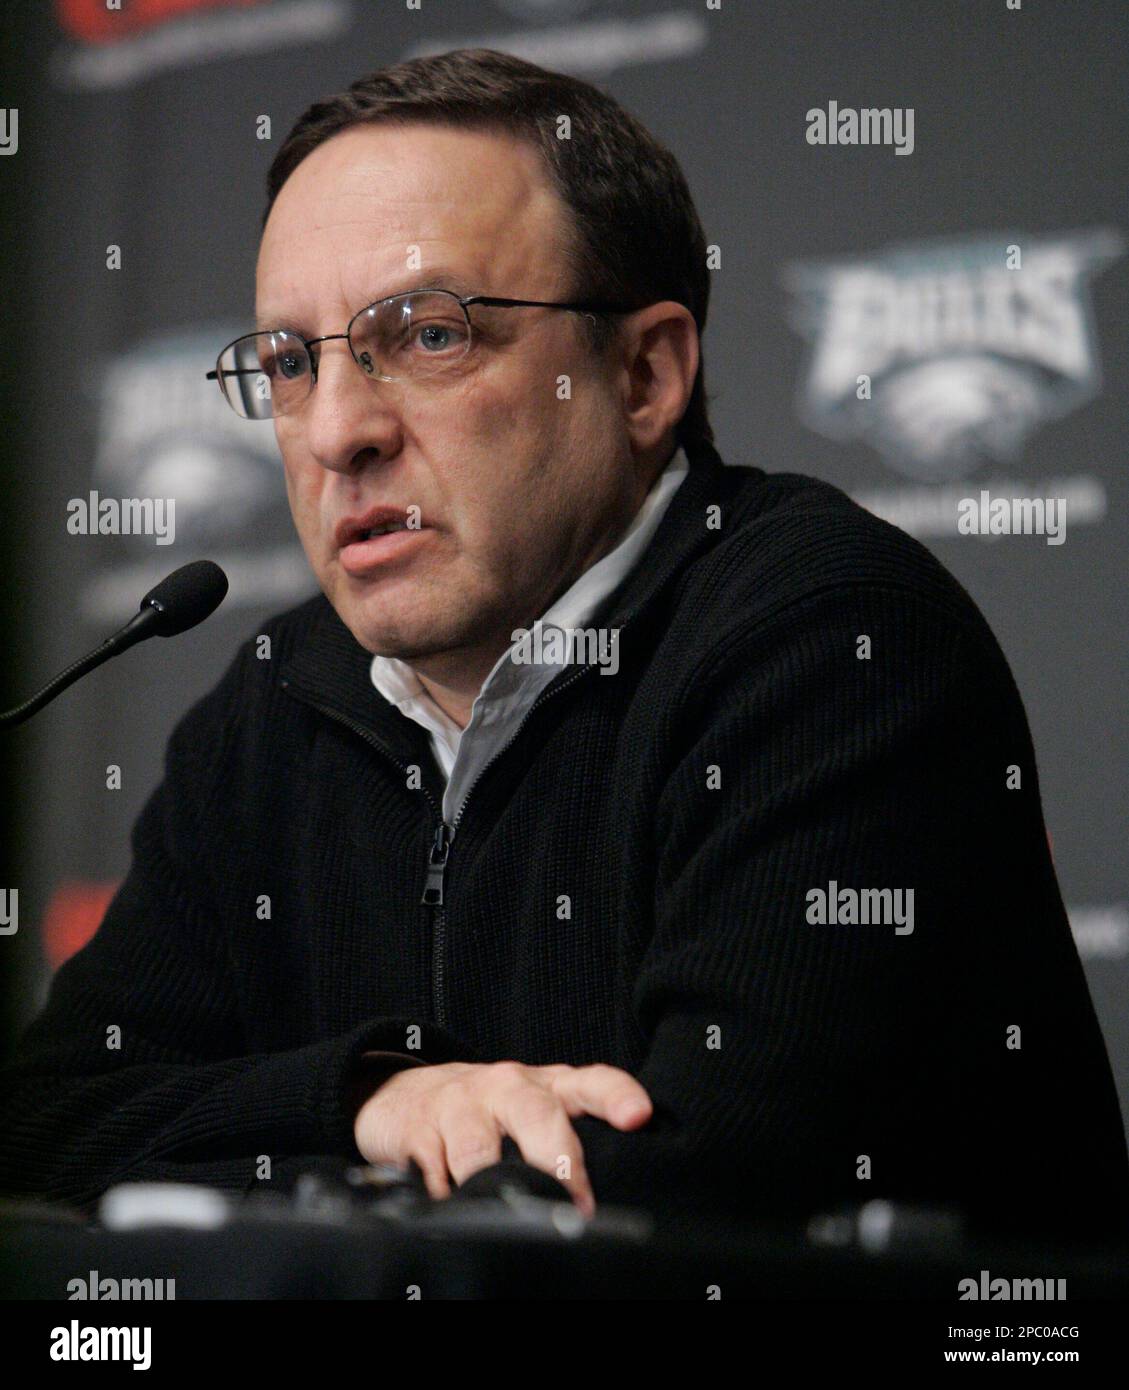 Philadelphia Eagles President Joe Banner makes remarks at a news conference  in Philadelphia, Monday, Feb. 12, 2007. Philadelphia Eagles coach Andy Reid  will leave the team for a month to deal with